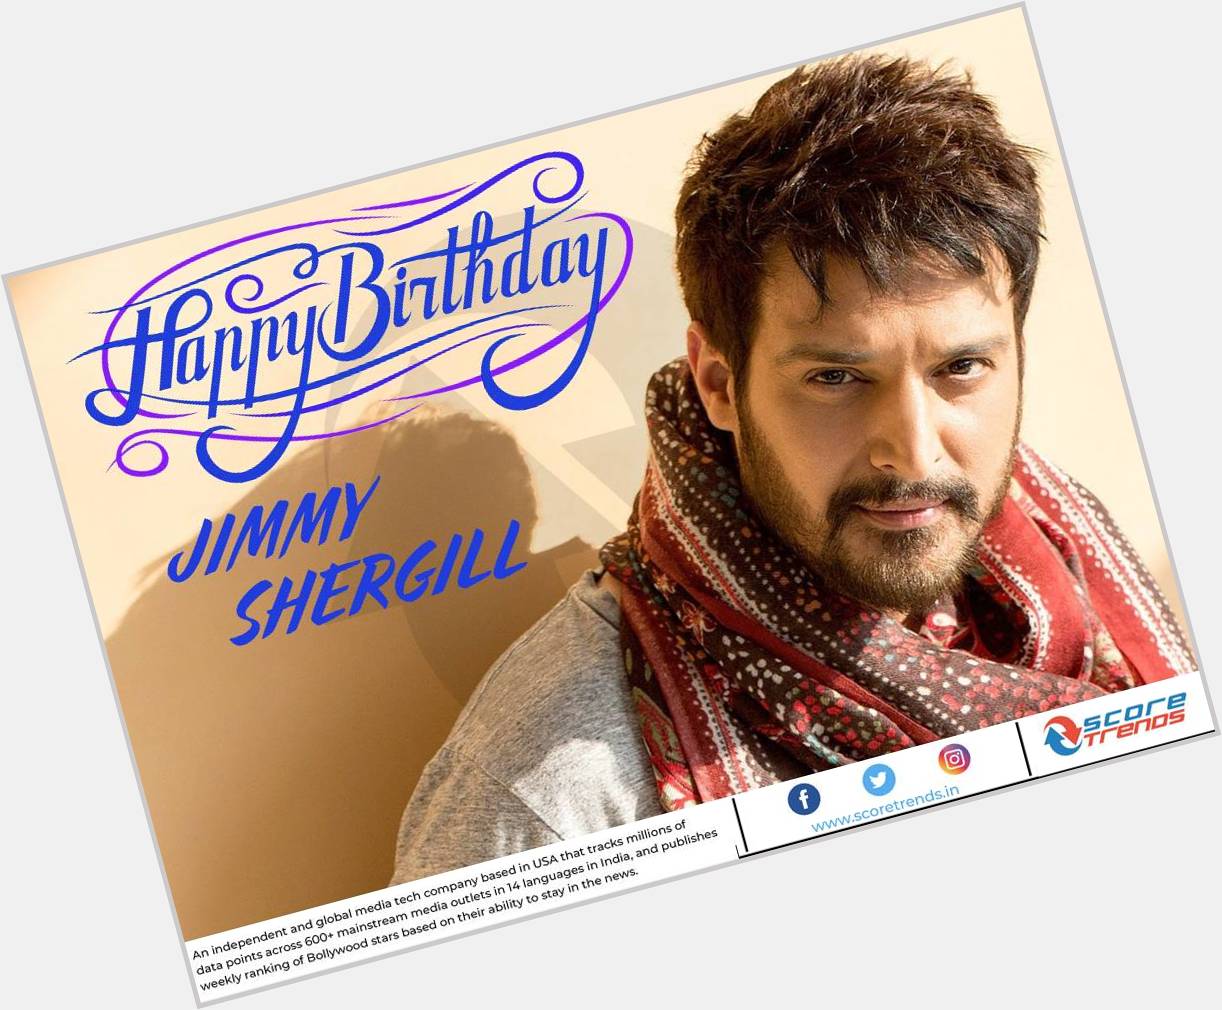 Score Trends wishes Jimmy Shergill a Happy Birthday!! 